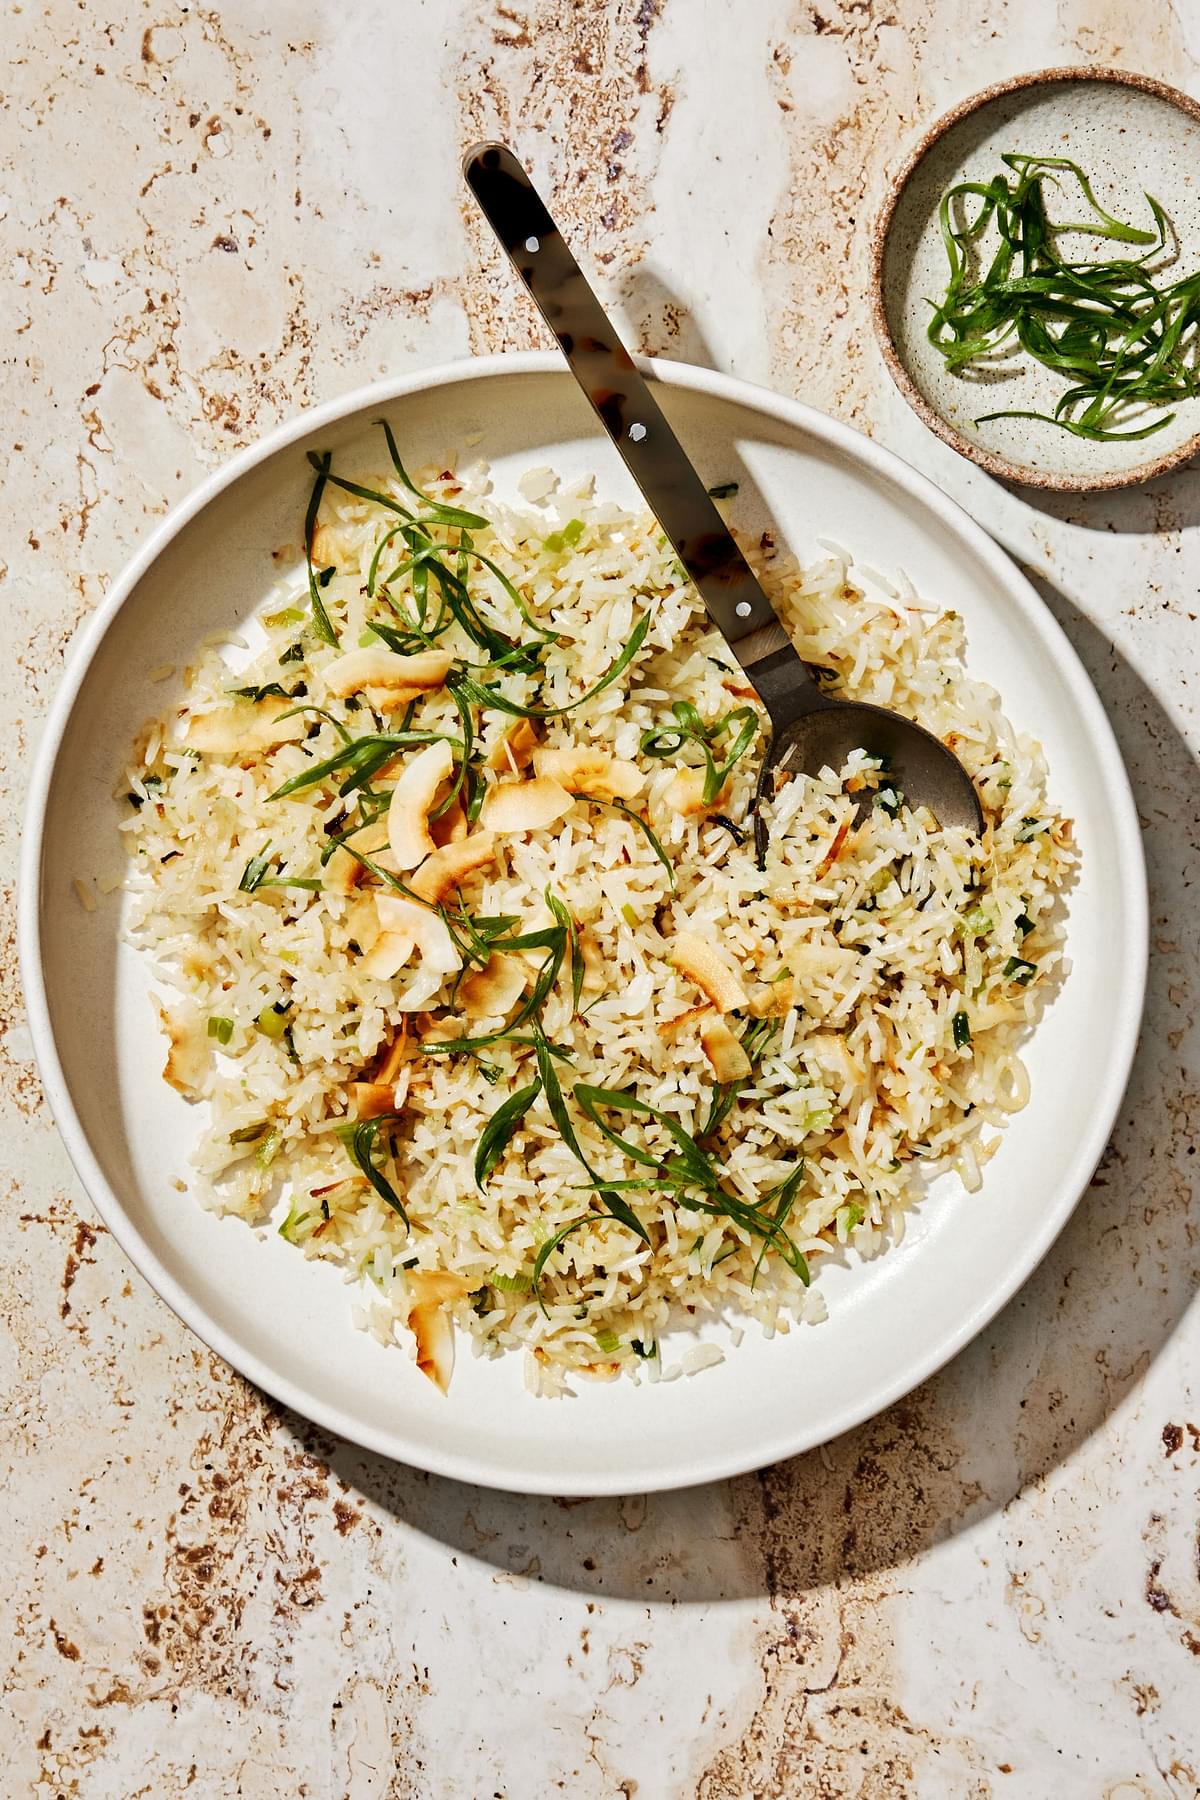 homemade coconut fried rice with green onions, ginger, and sweetened coconut flakes in a serving bowl with a wooden spoon